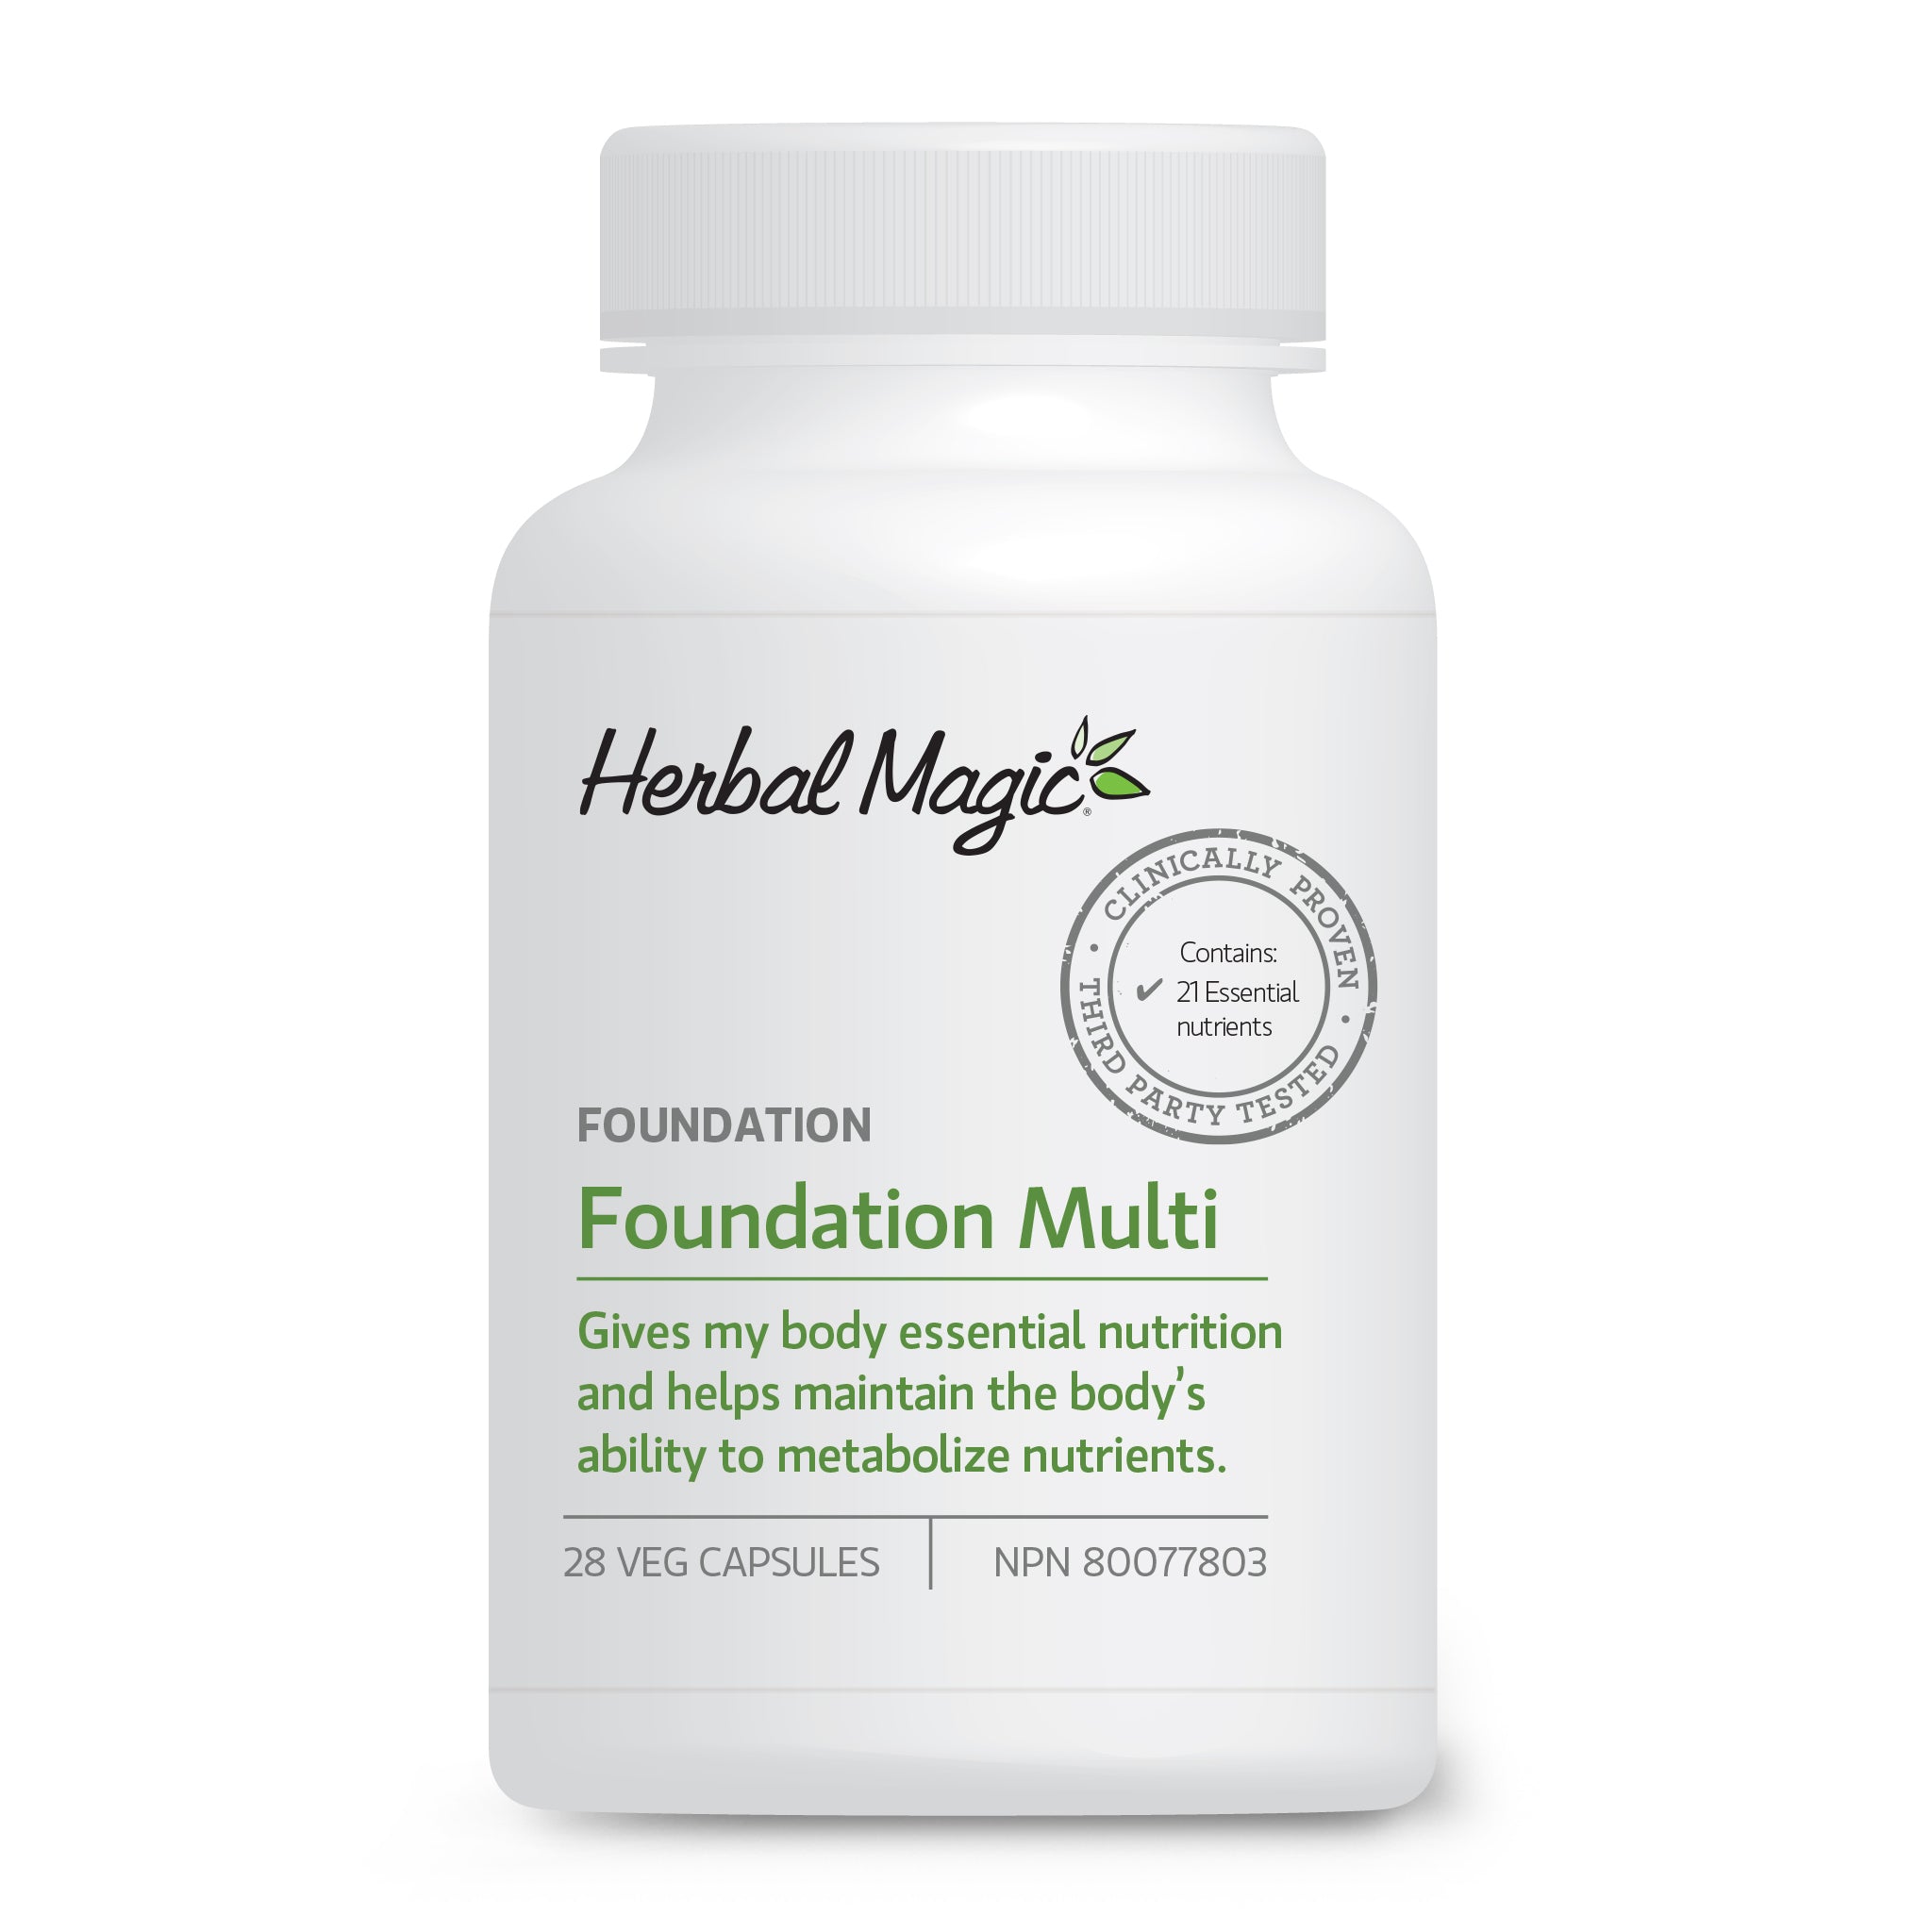 Herbal Magic's Foundation Multivitamin helps avoid nutritional deficiencies during weight loss.